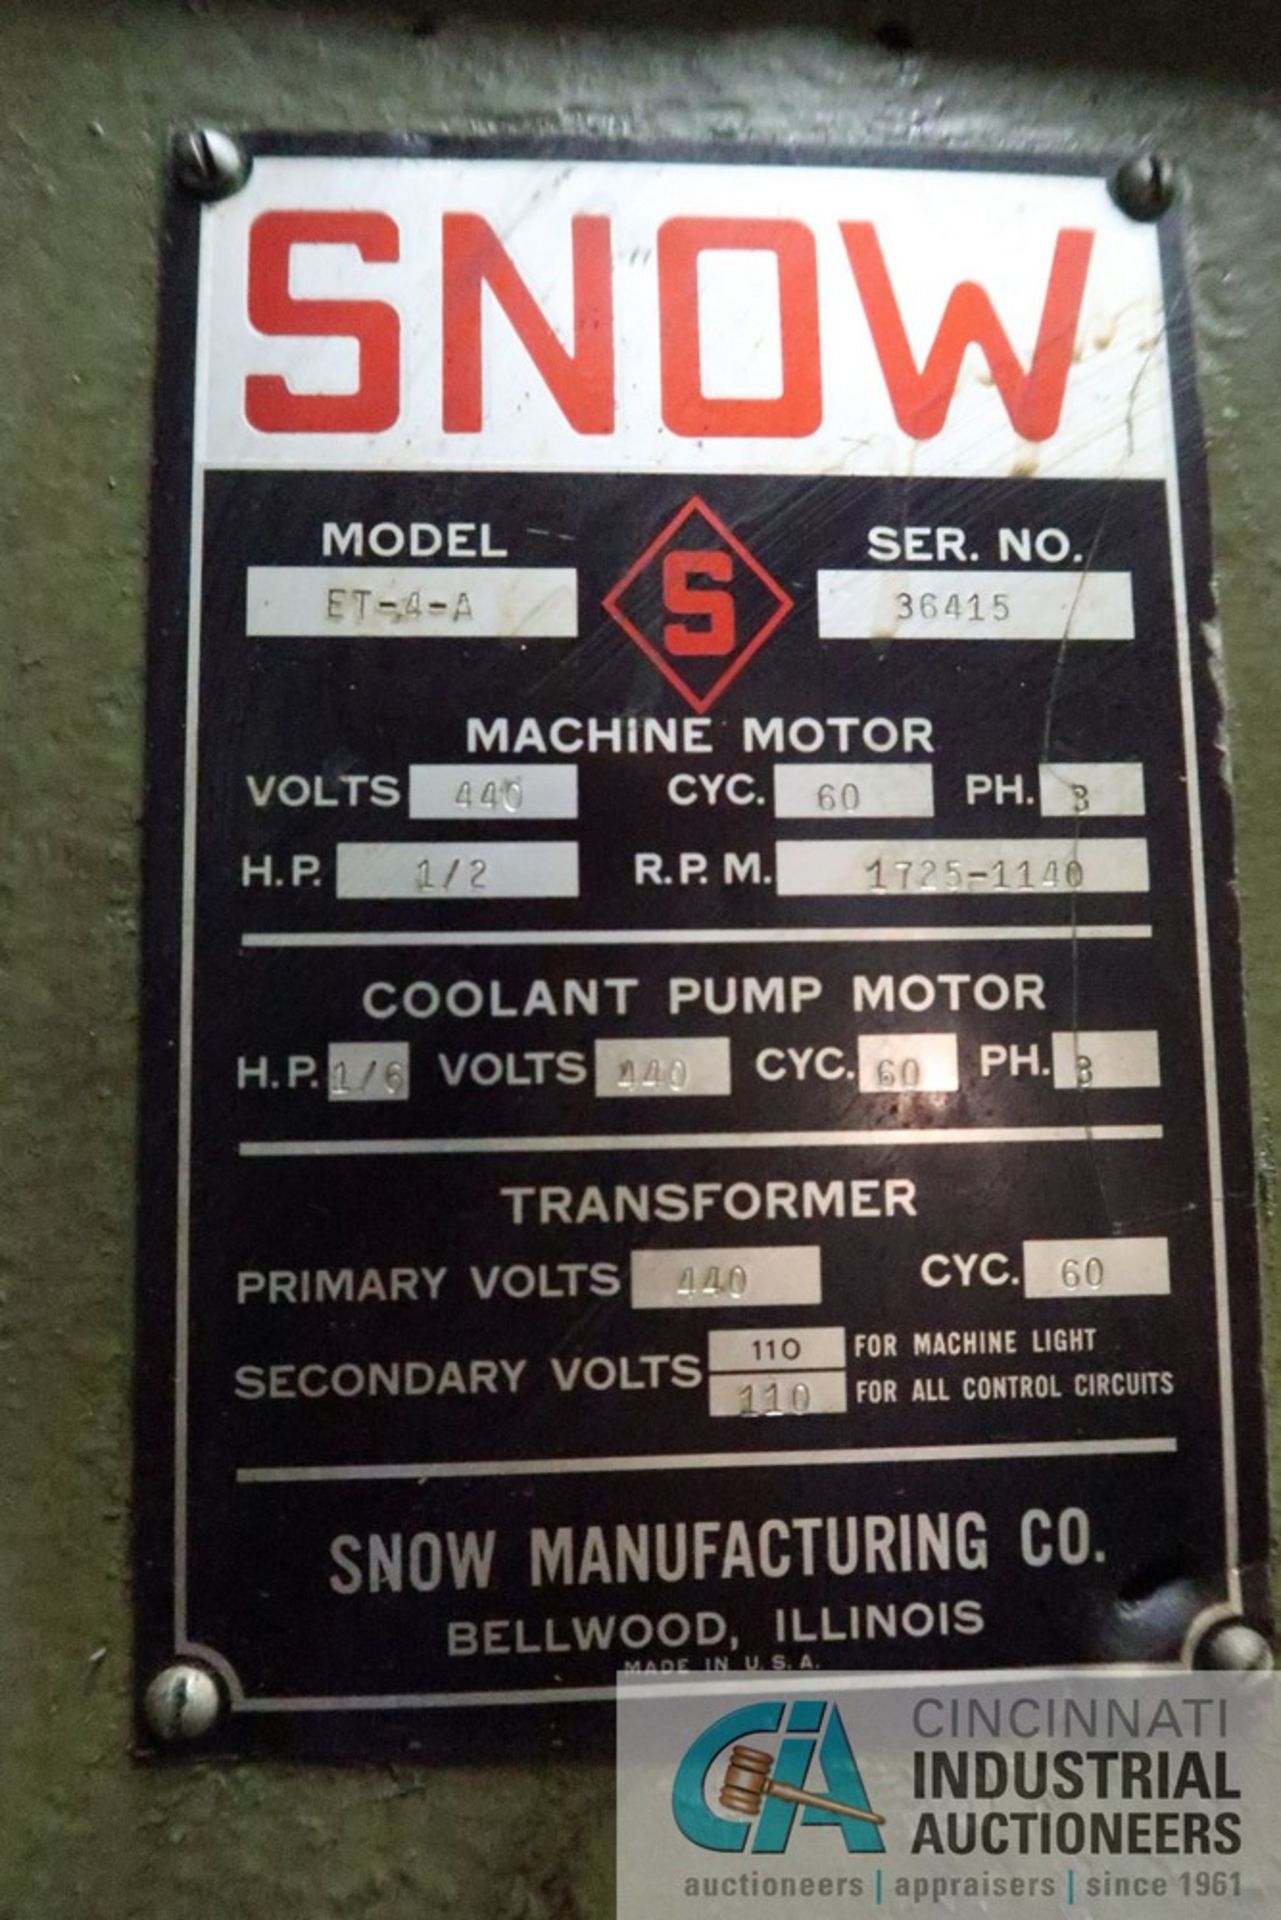 **1/2 HP SNOW MODEL ET-4-A 8-SPEED PNEUMATIC TAPPING MACHINE; S/N 36415, SPINDLE SPEED 200-850 *** - Image 5 of 5